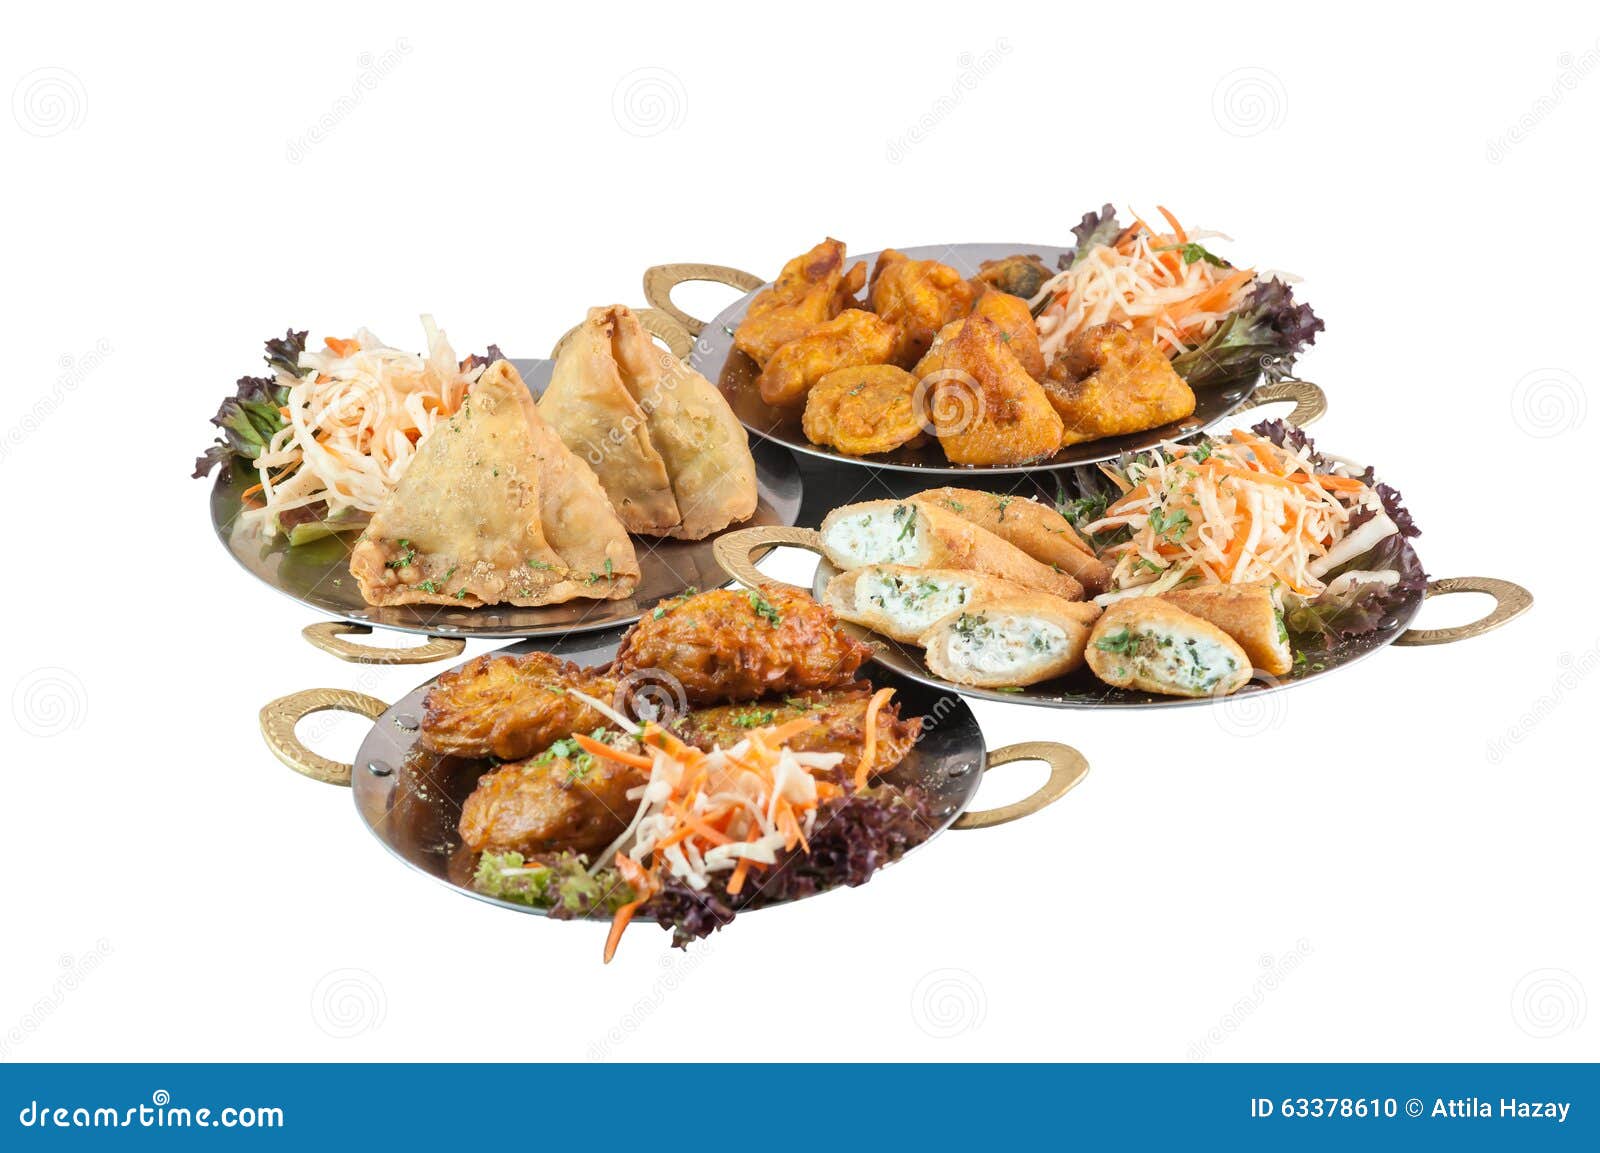 vegetarian indian food or starters on metal plates including samosa on white background